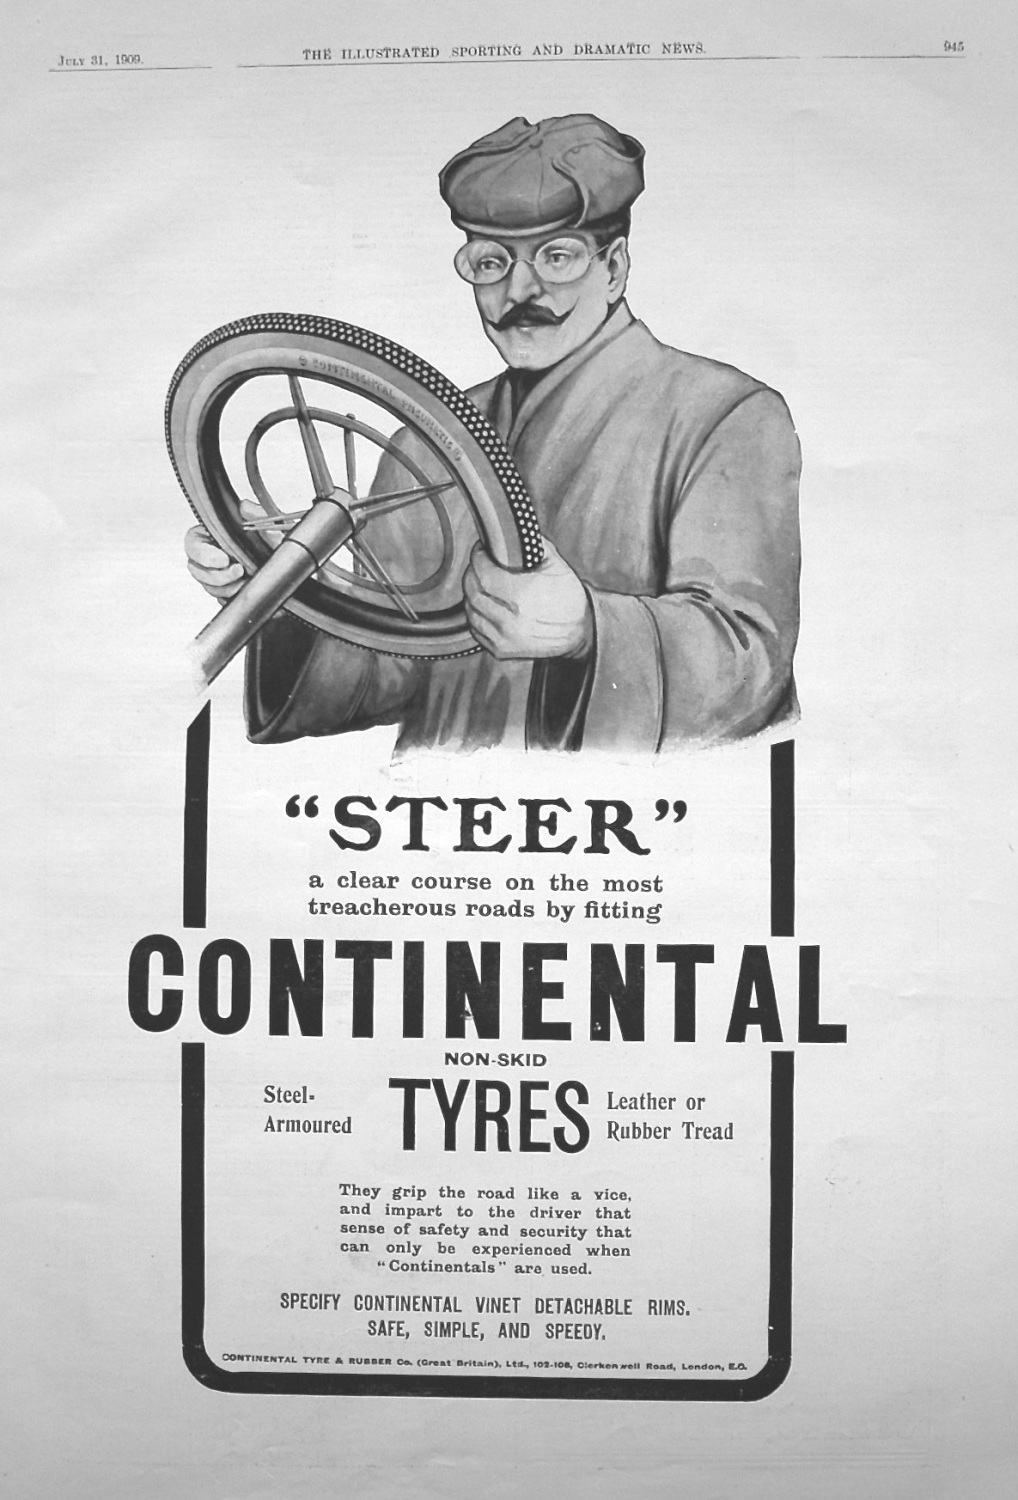 Continental Tyres. 1909